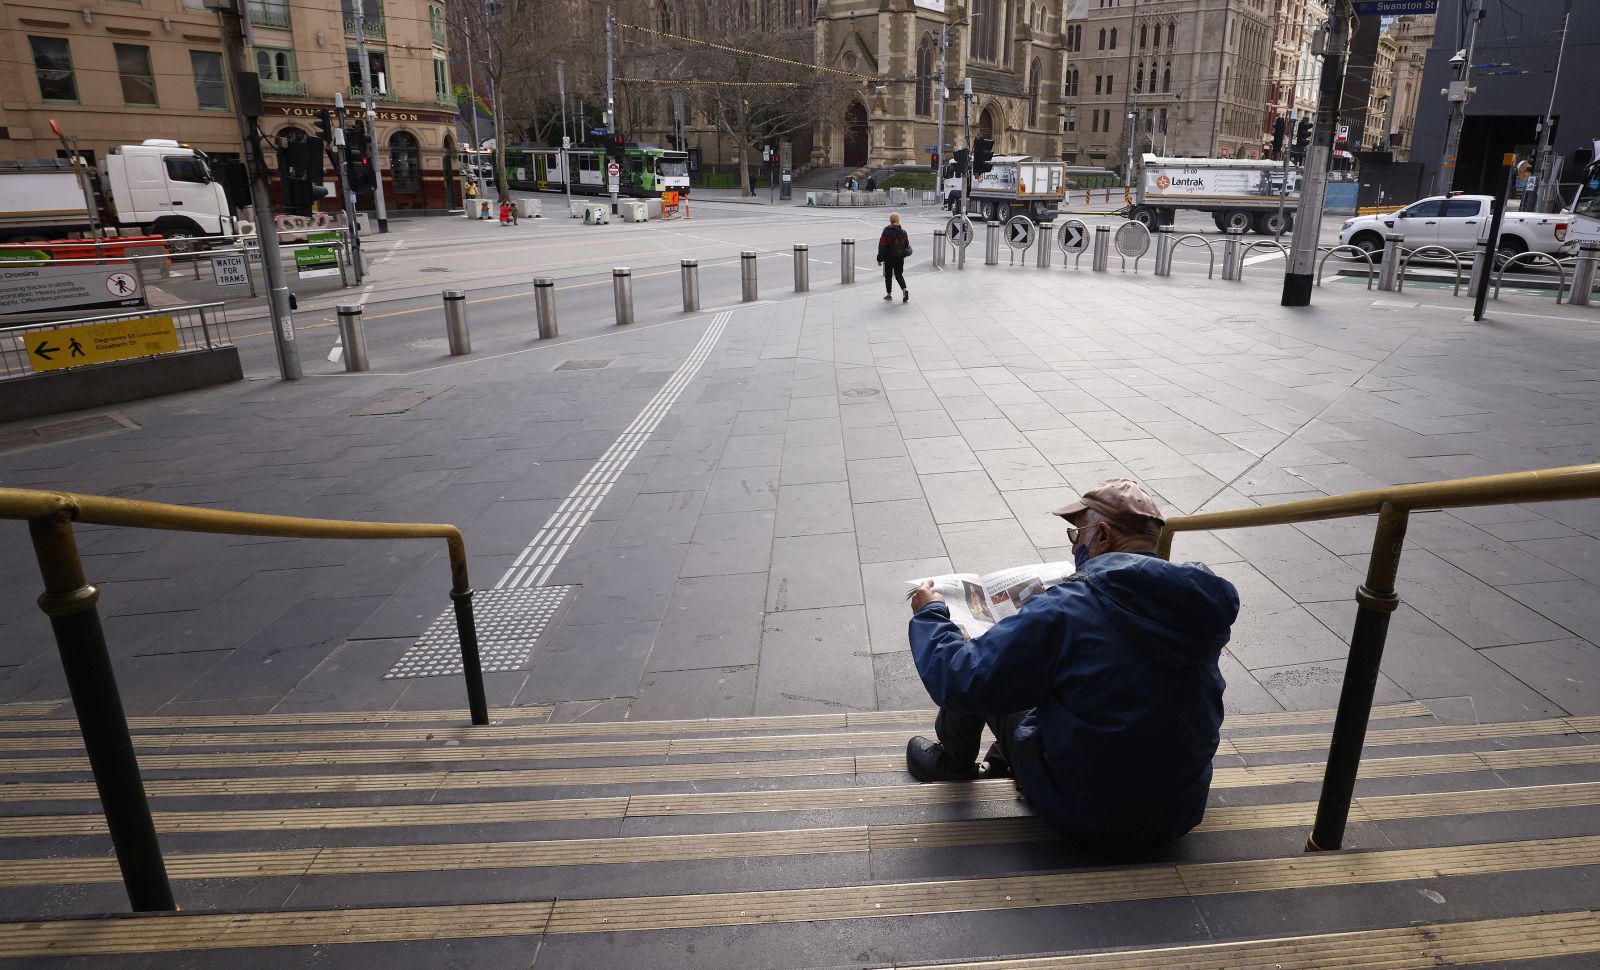 epa09408982 A man reads the newspaper on the steps of Flinders Street Station in Melbourne, Victoria, Australia, 11 August 2021. Regional Victoria's lockdown is over but people in Melbourne are still days from finding out when theirs will end.  EPA/DANIEL POCKETT AUSTRALIA AND NEW ZEALAND OUT